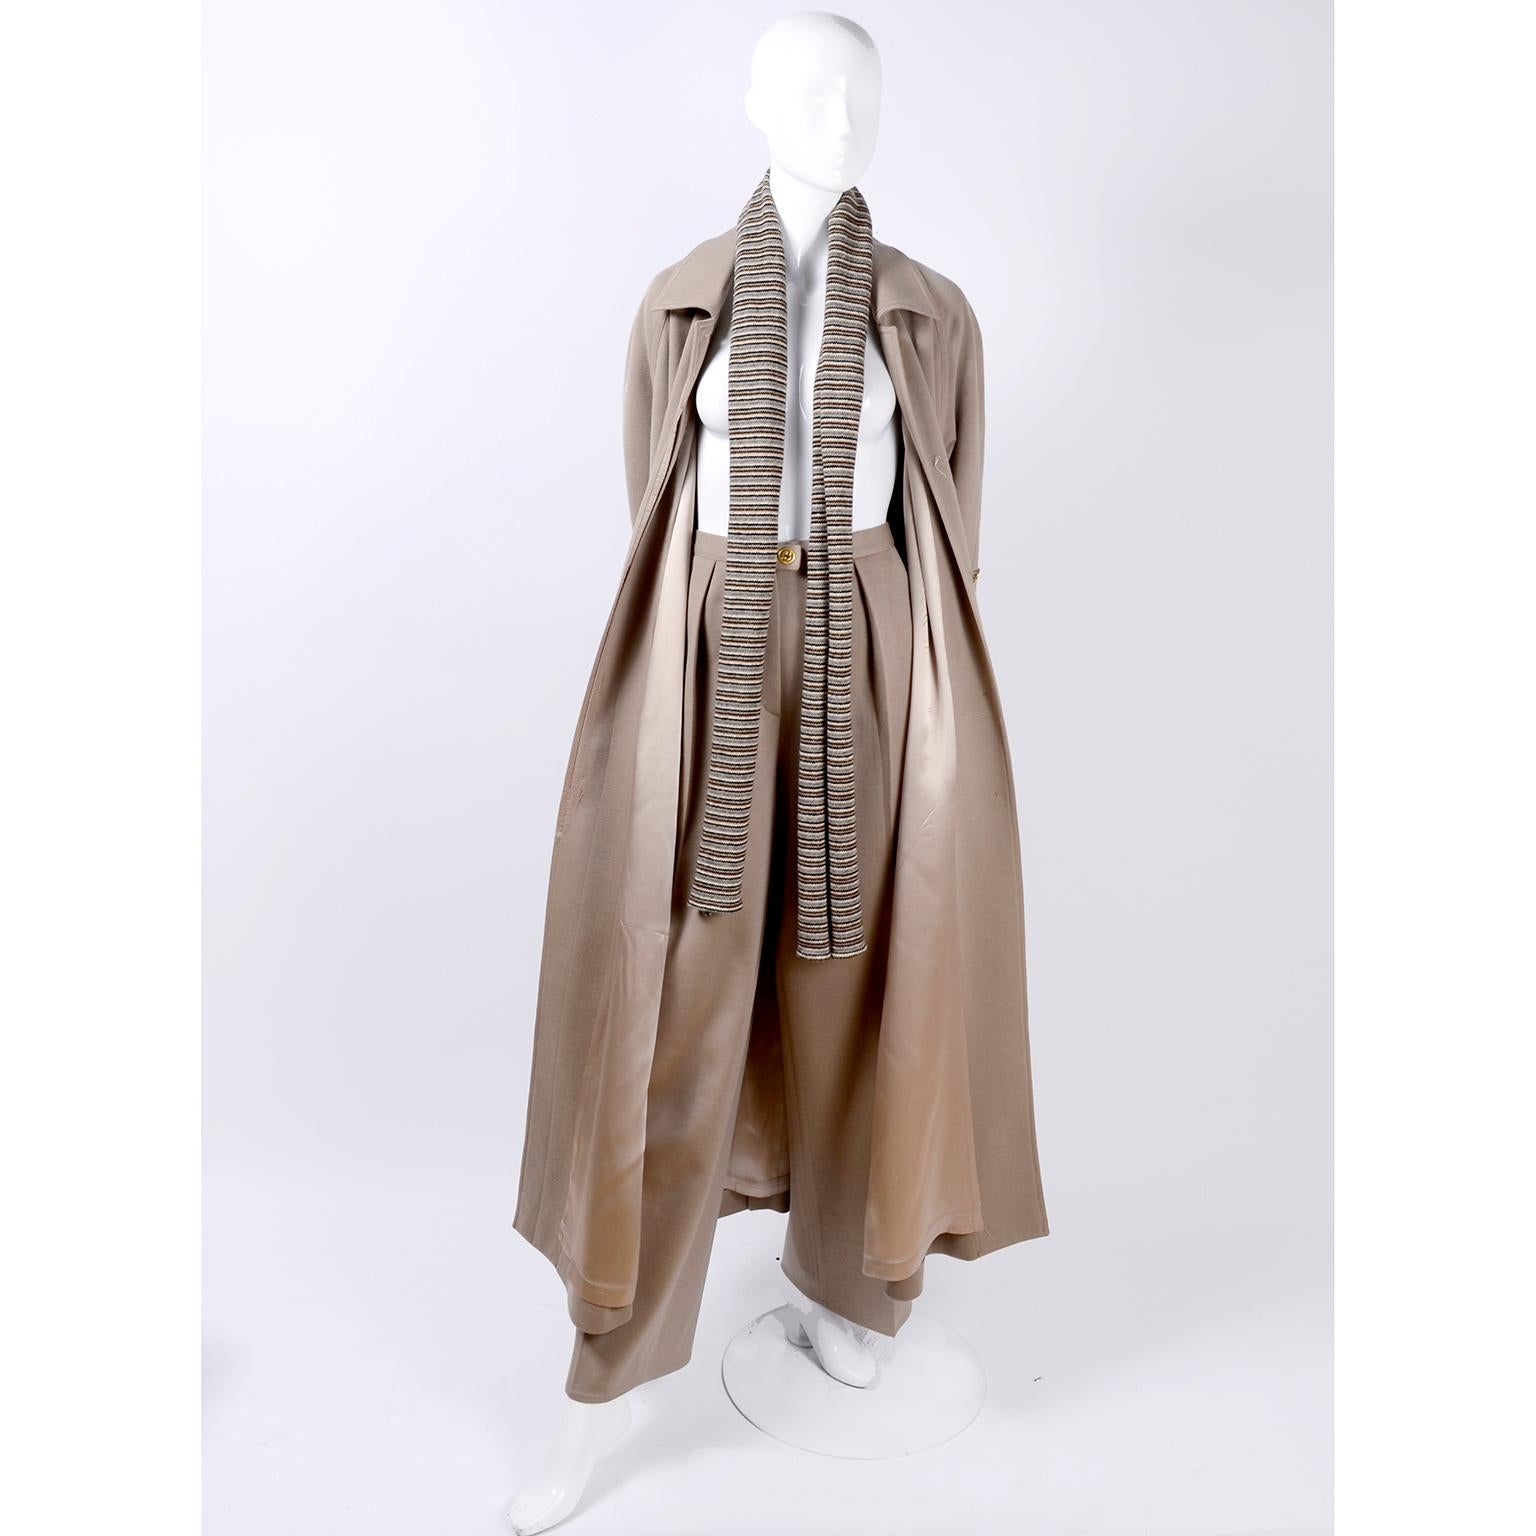 This is a beautiful 3 piece wool ensemble from Sonia Rykiel, Paris. This is a great, versatile outfit  that includes a pair of high waist trousers, a wonderful lined long coat with a belt, and a striped scarf. This vintage pants suit came from an